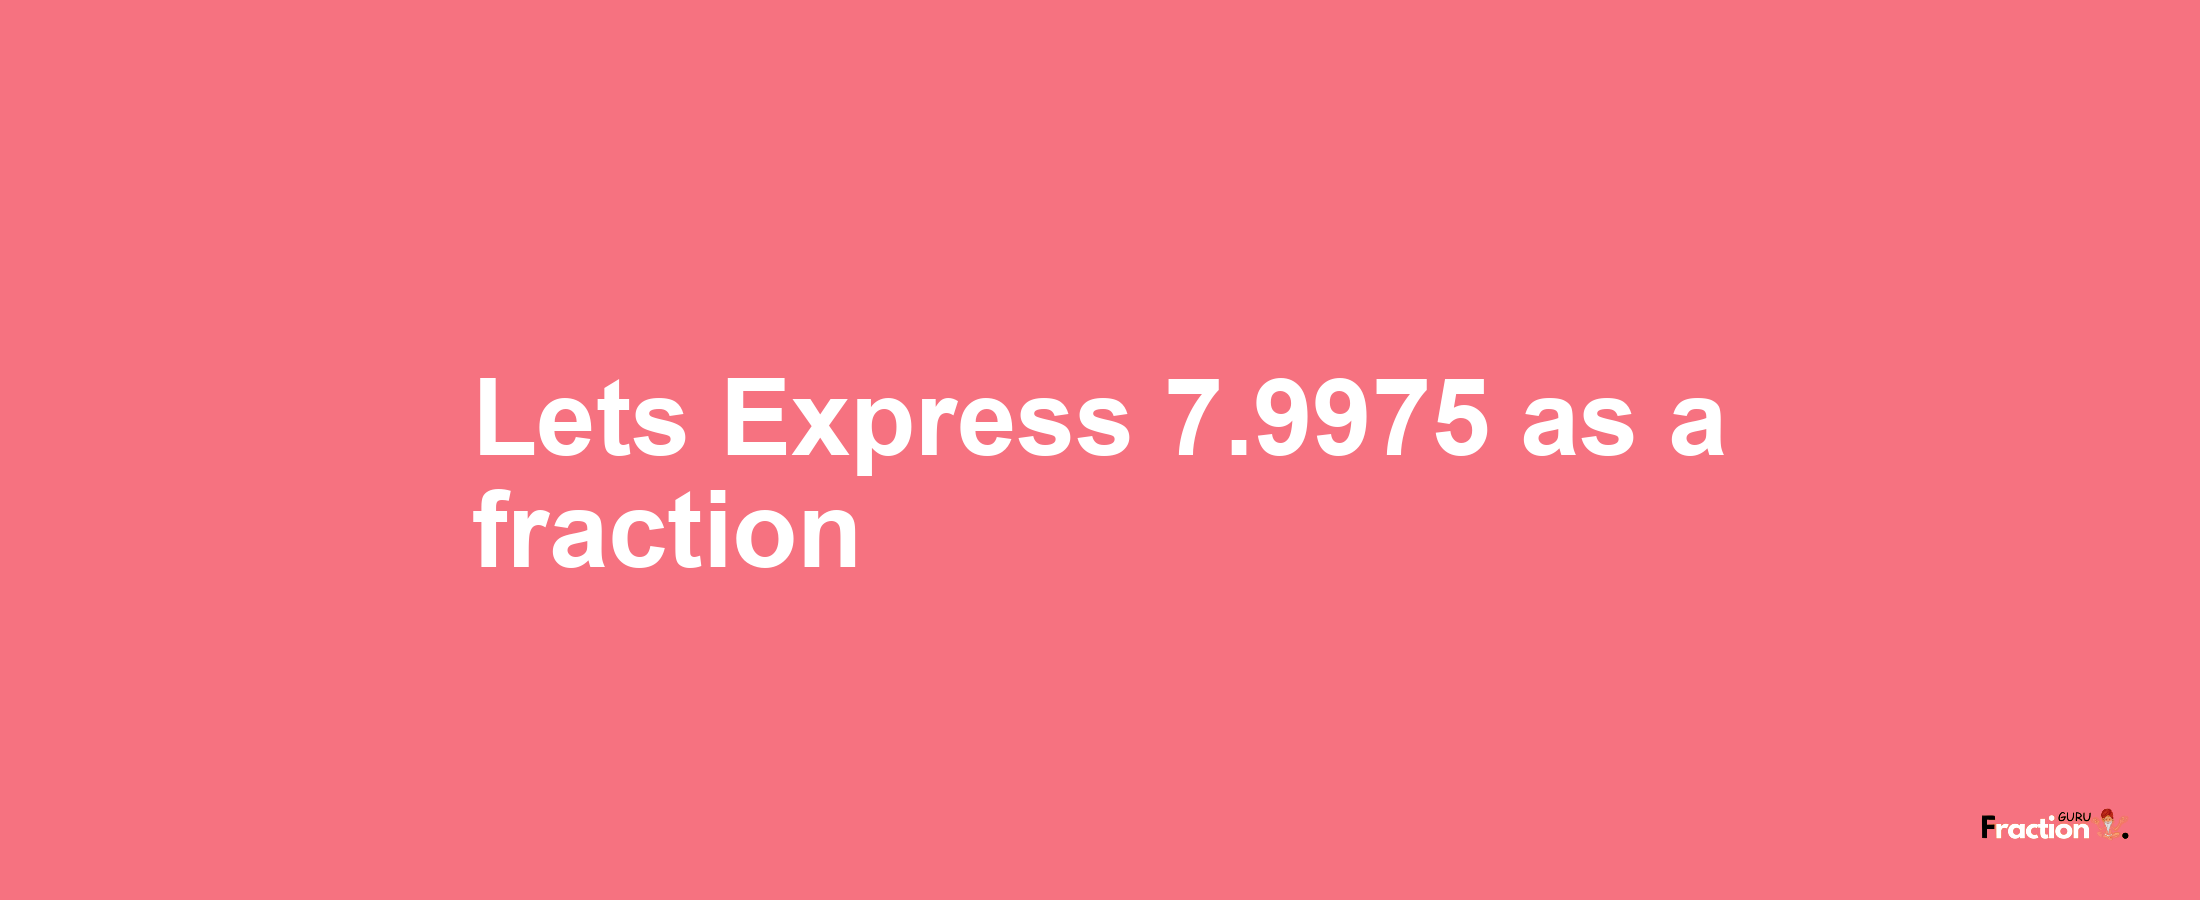 Lets Express 7.9975 as afraction